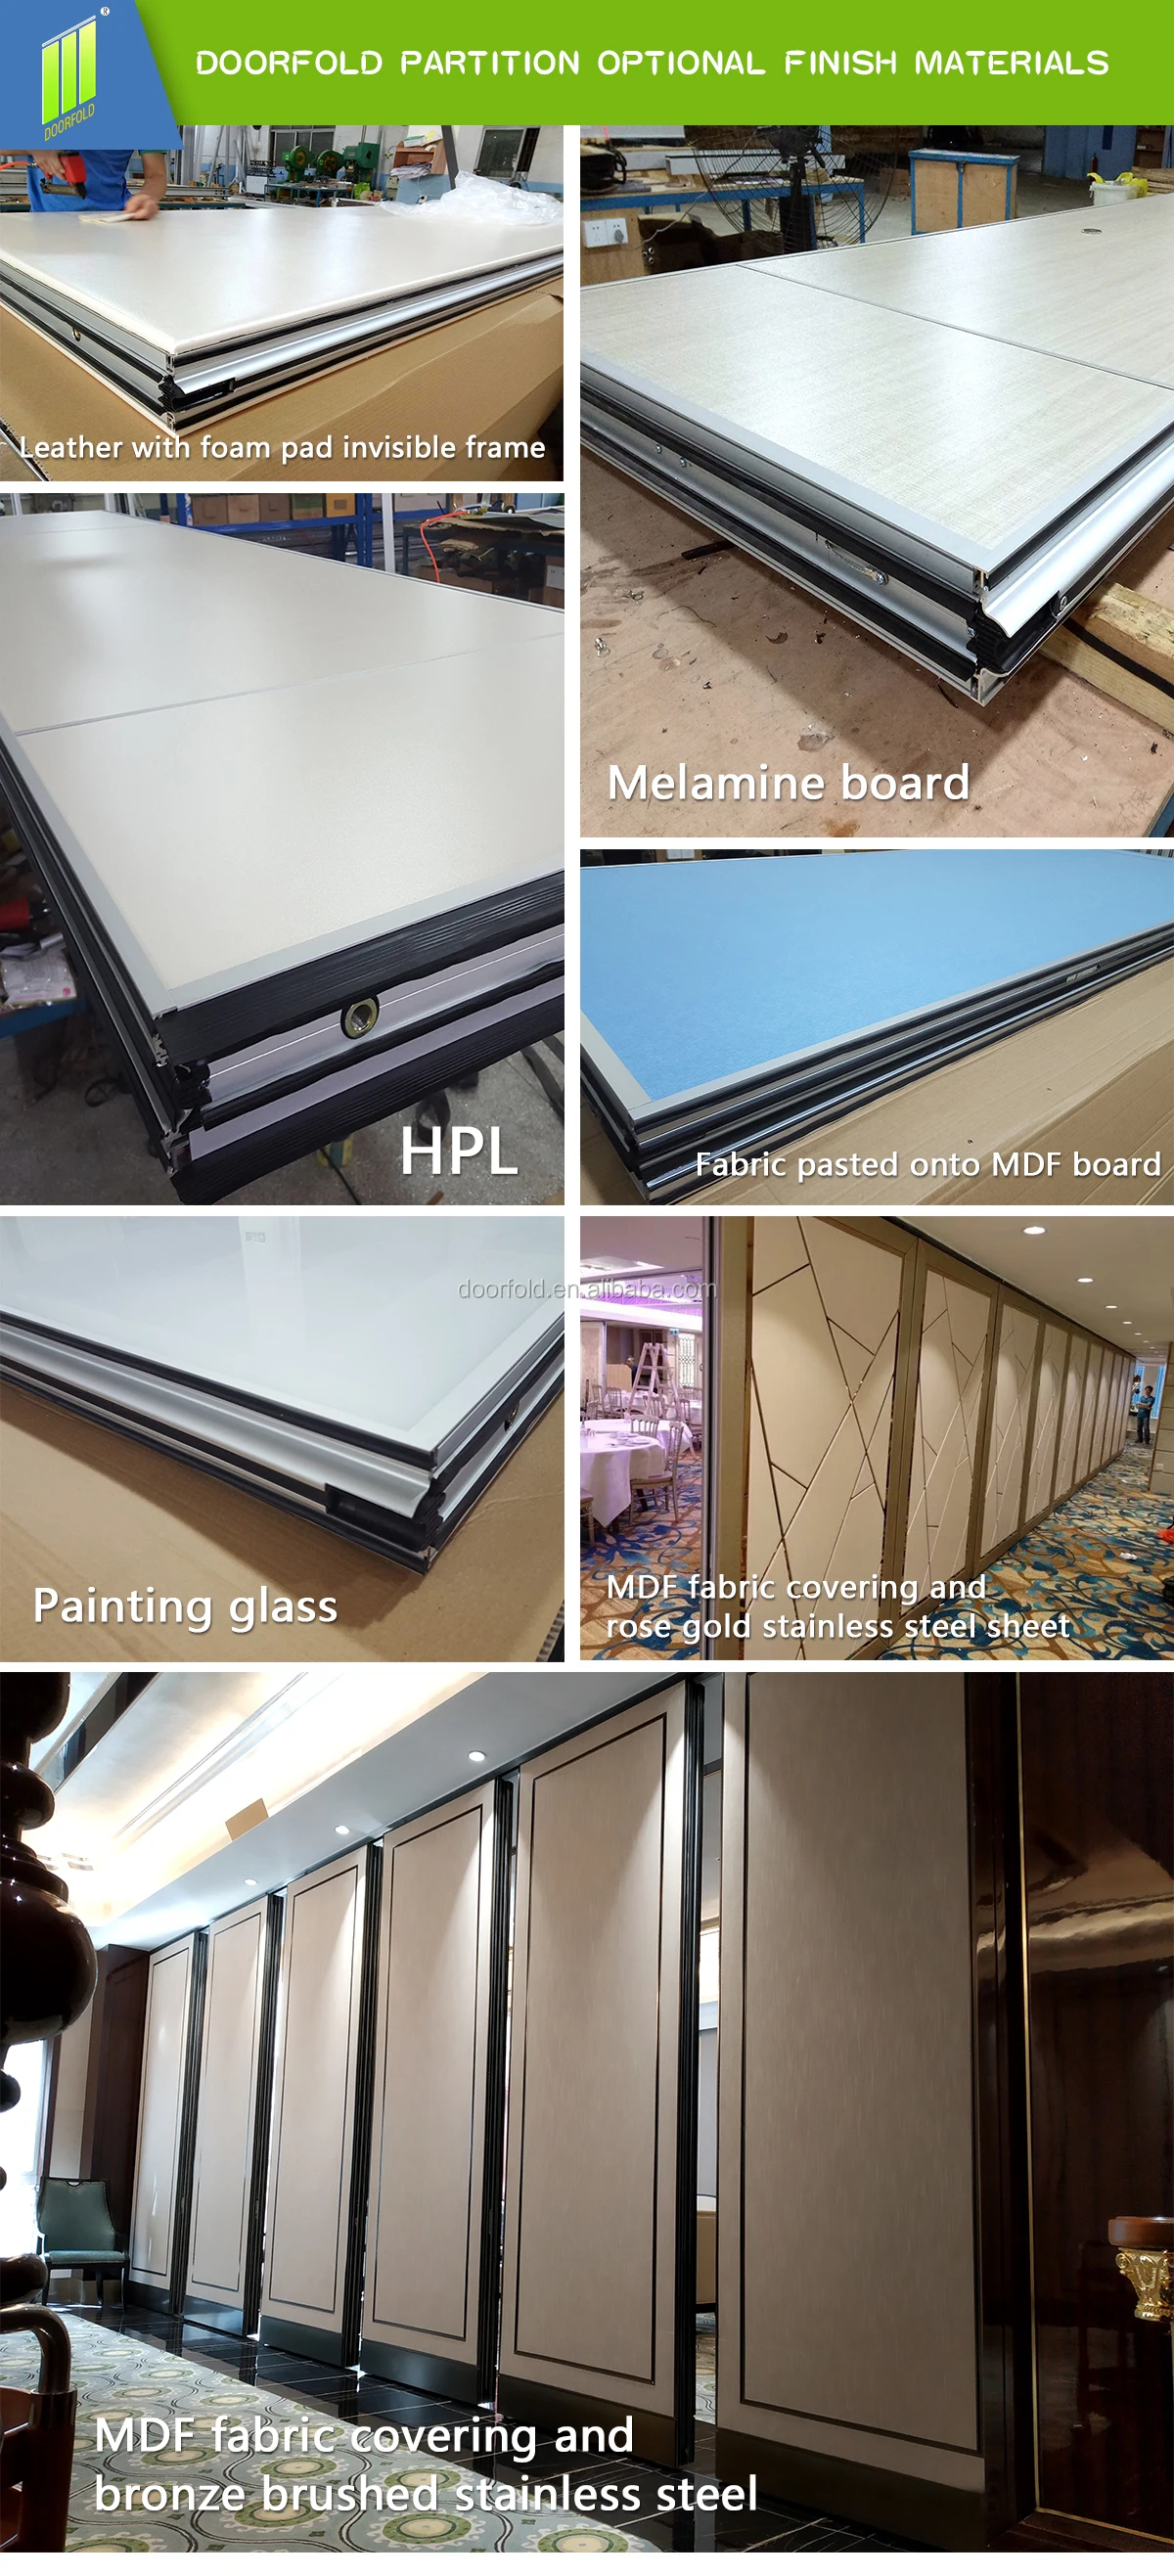 Doorfold partition supplier in china supply operable wall for banquet hall operable partition wall